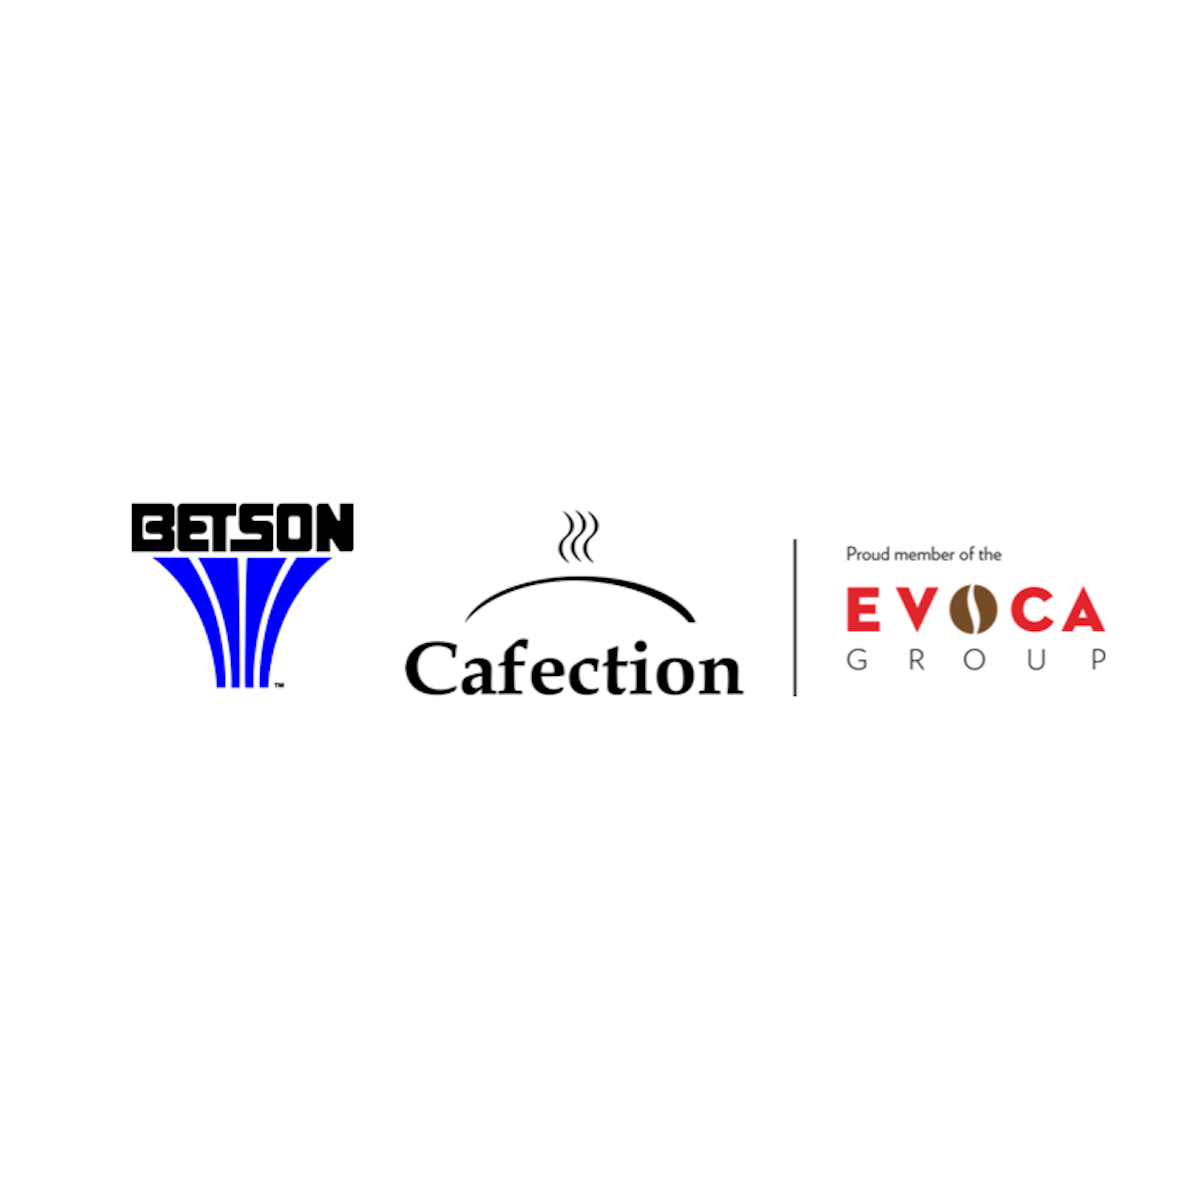 In partnership with Cafection | Evoca, Betson Enterprises is excited to announce it will assume distribution of all parts for the Evoca line-up beginning Dec. 1, 2019.